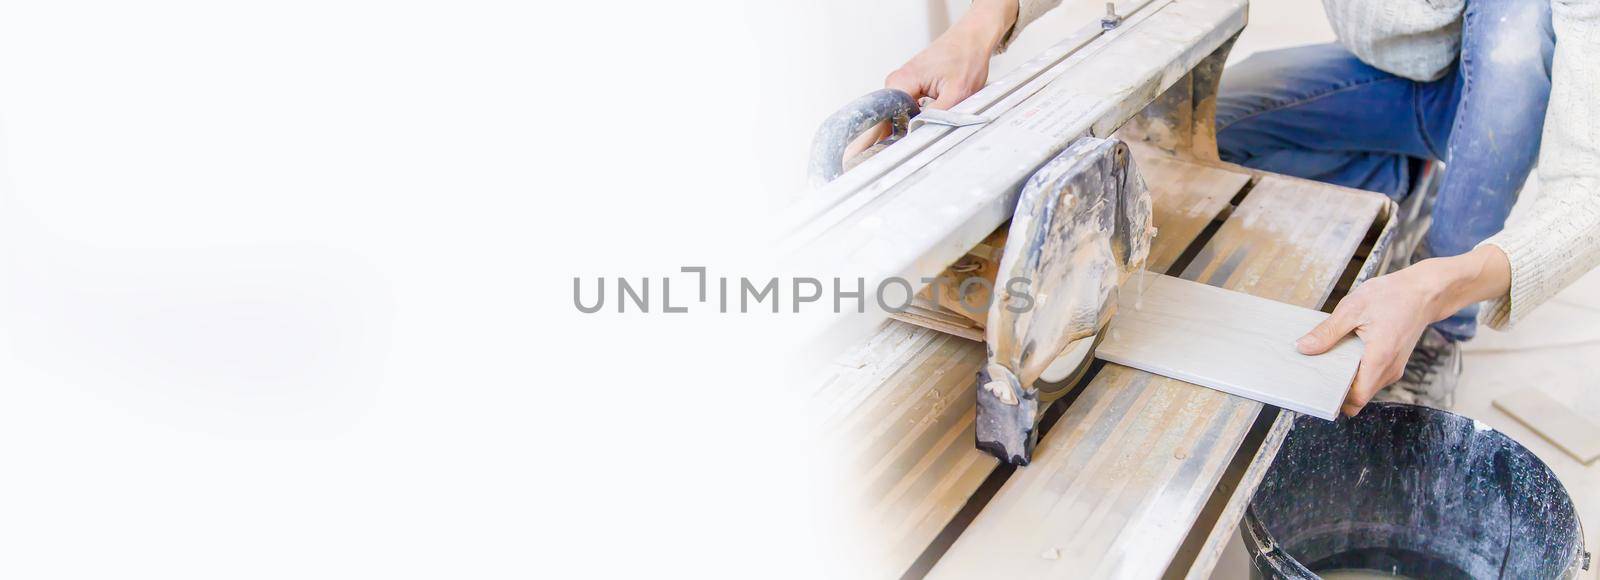 cut tiles with a tile cutter repair in the house. Selective focus. by yanadjana